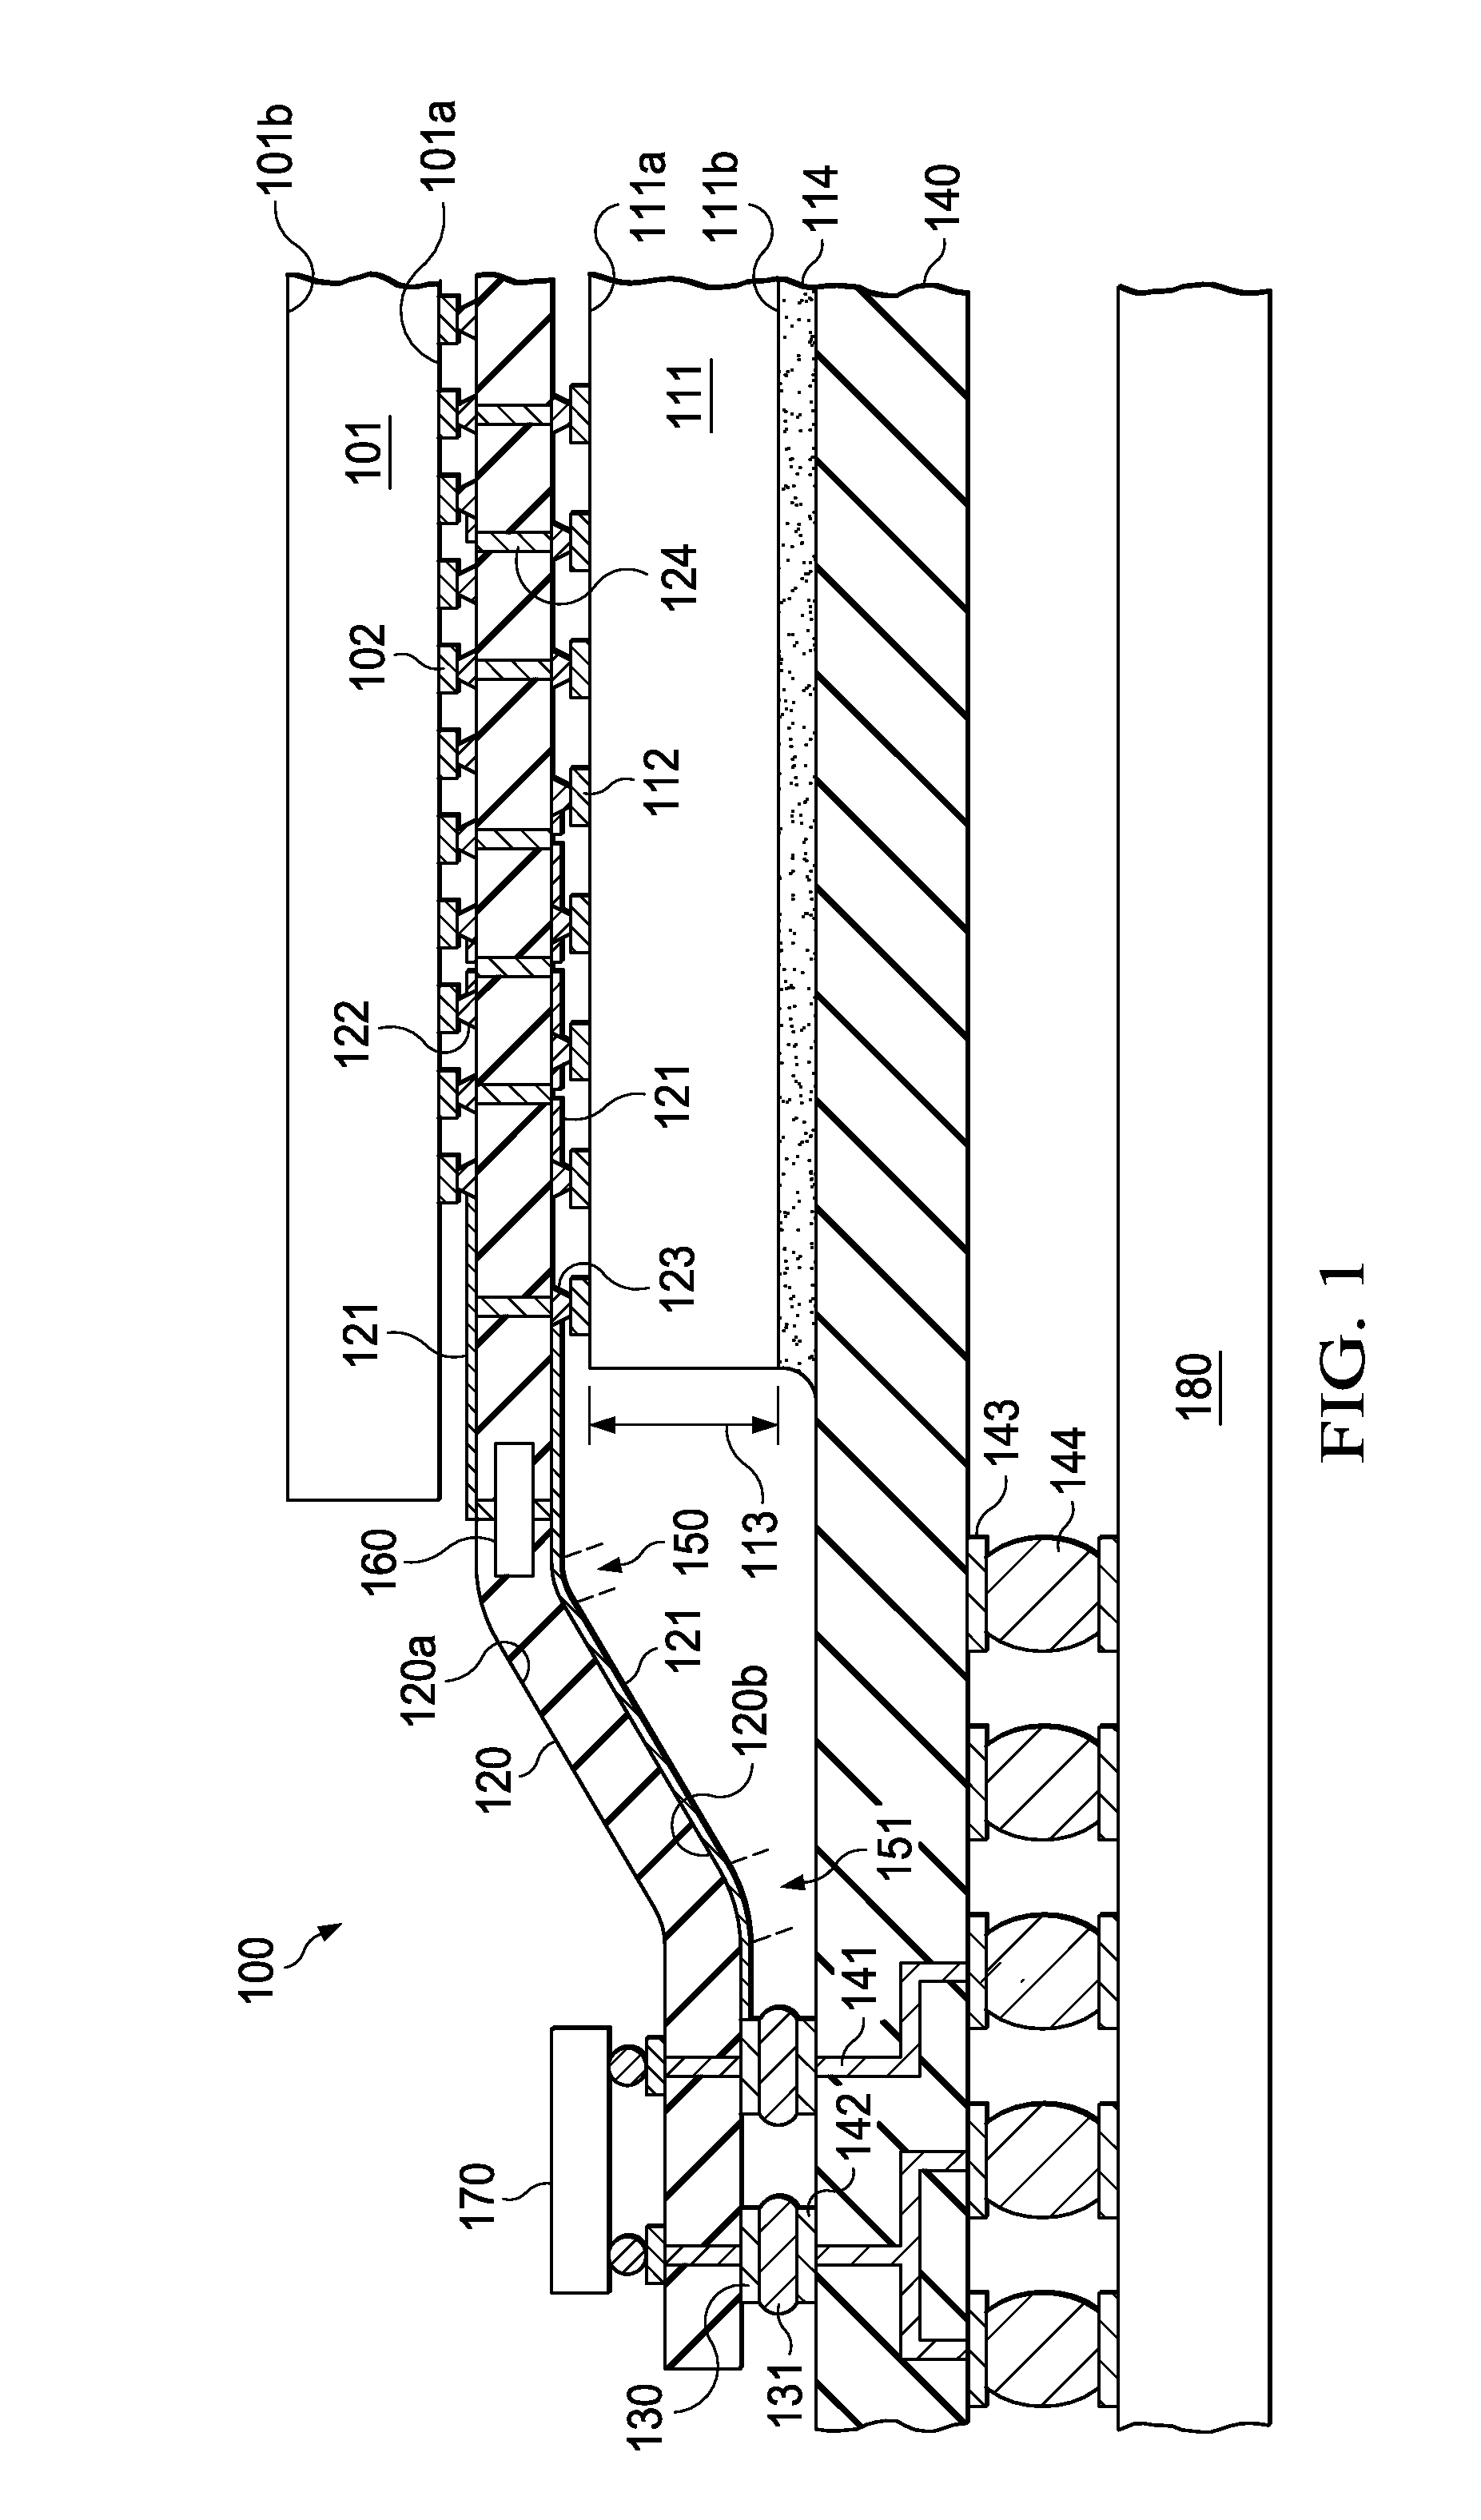 Flexible Interposer for Stacking Semiconductor Chips and Connecting Same to Substrate